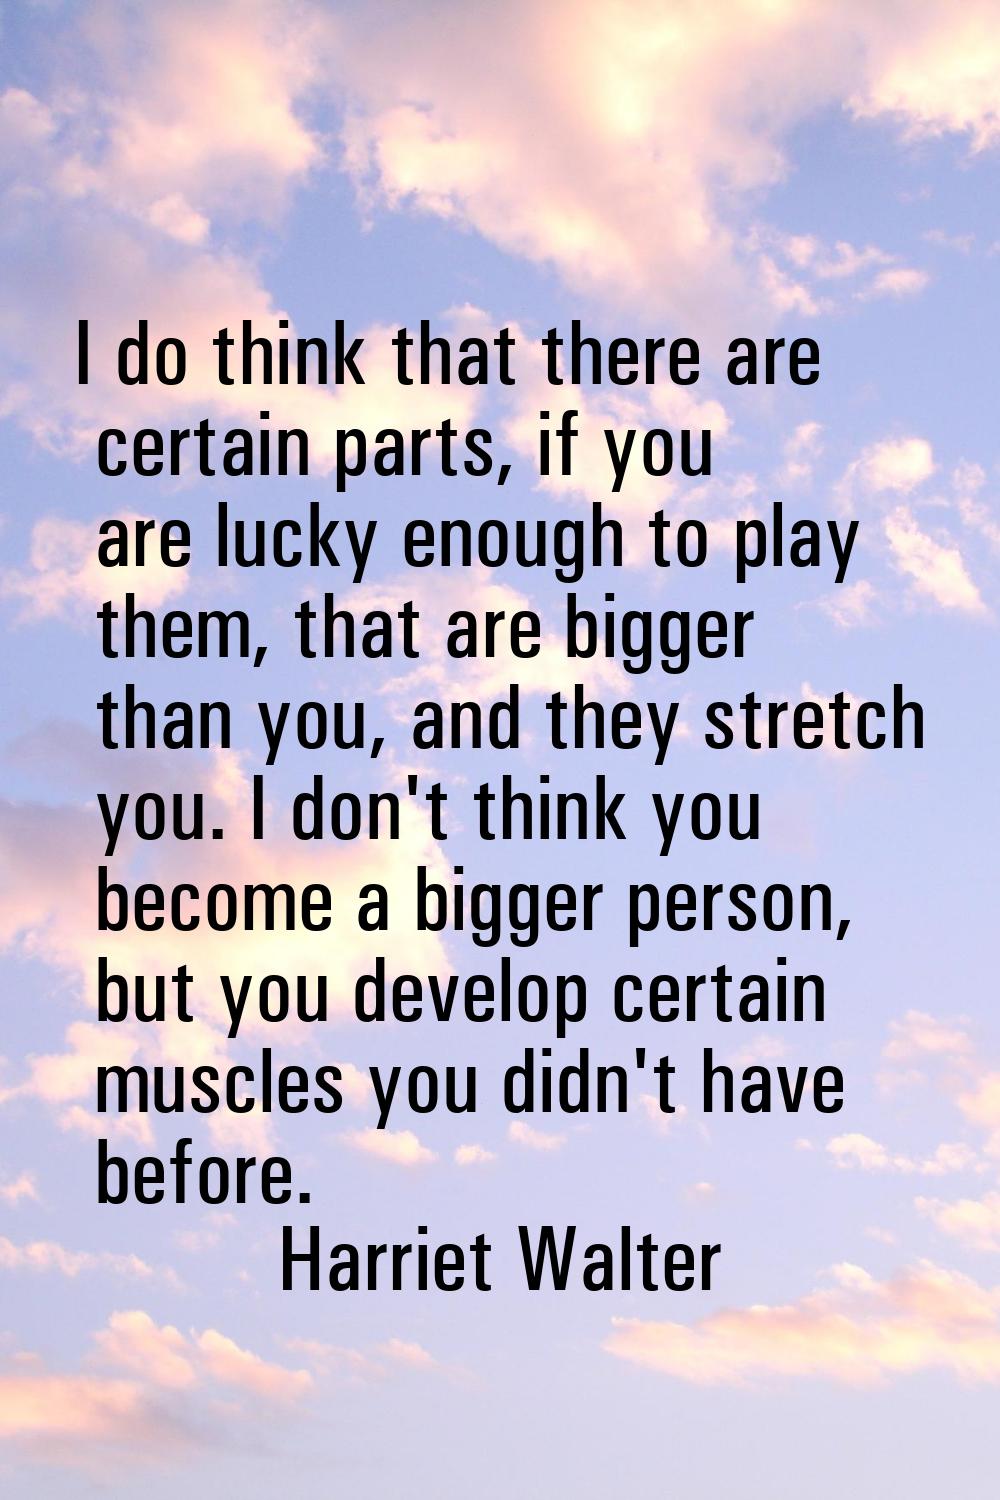 I do think that there are certain parts, if you are lucky enough to play them, that are bigger than